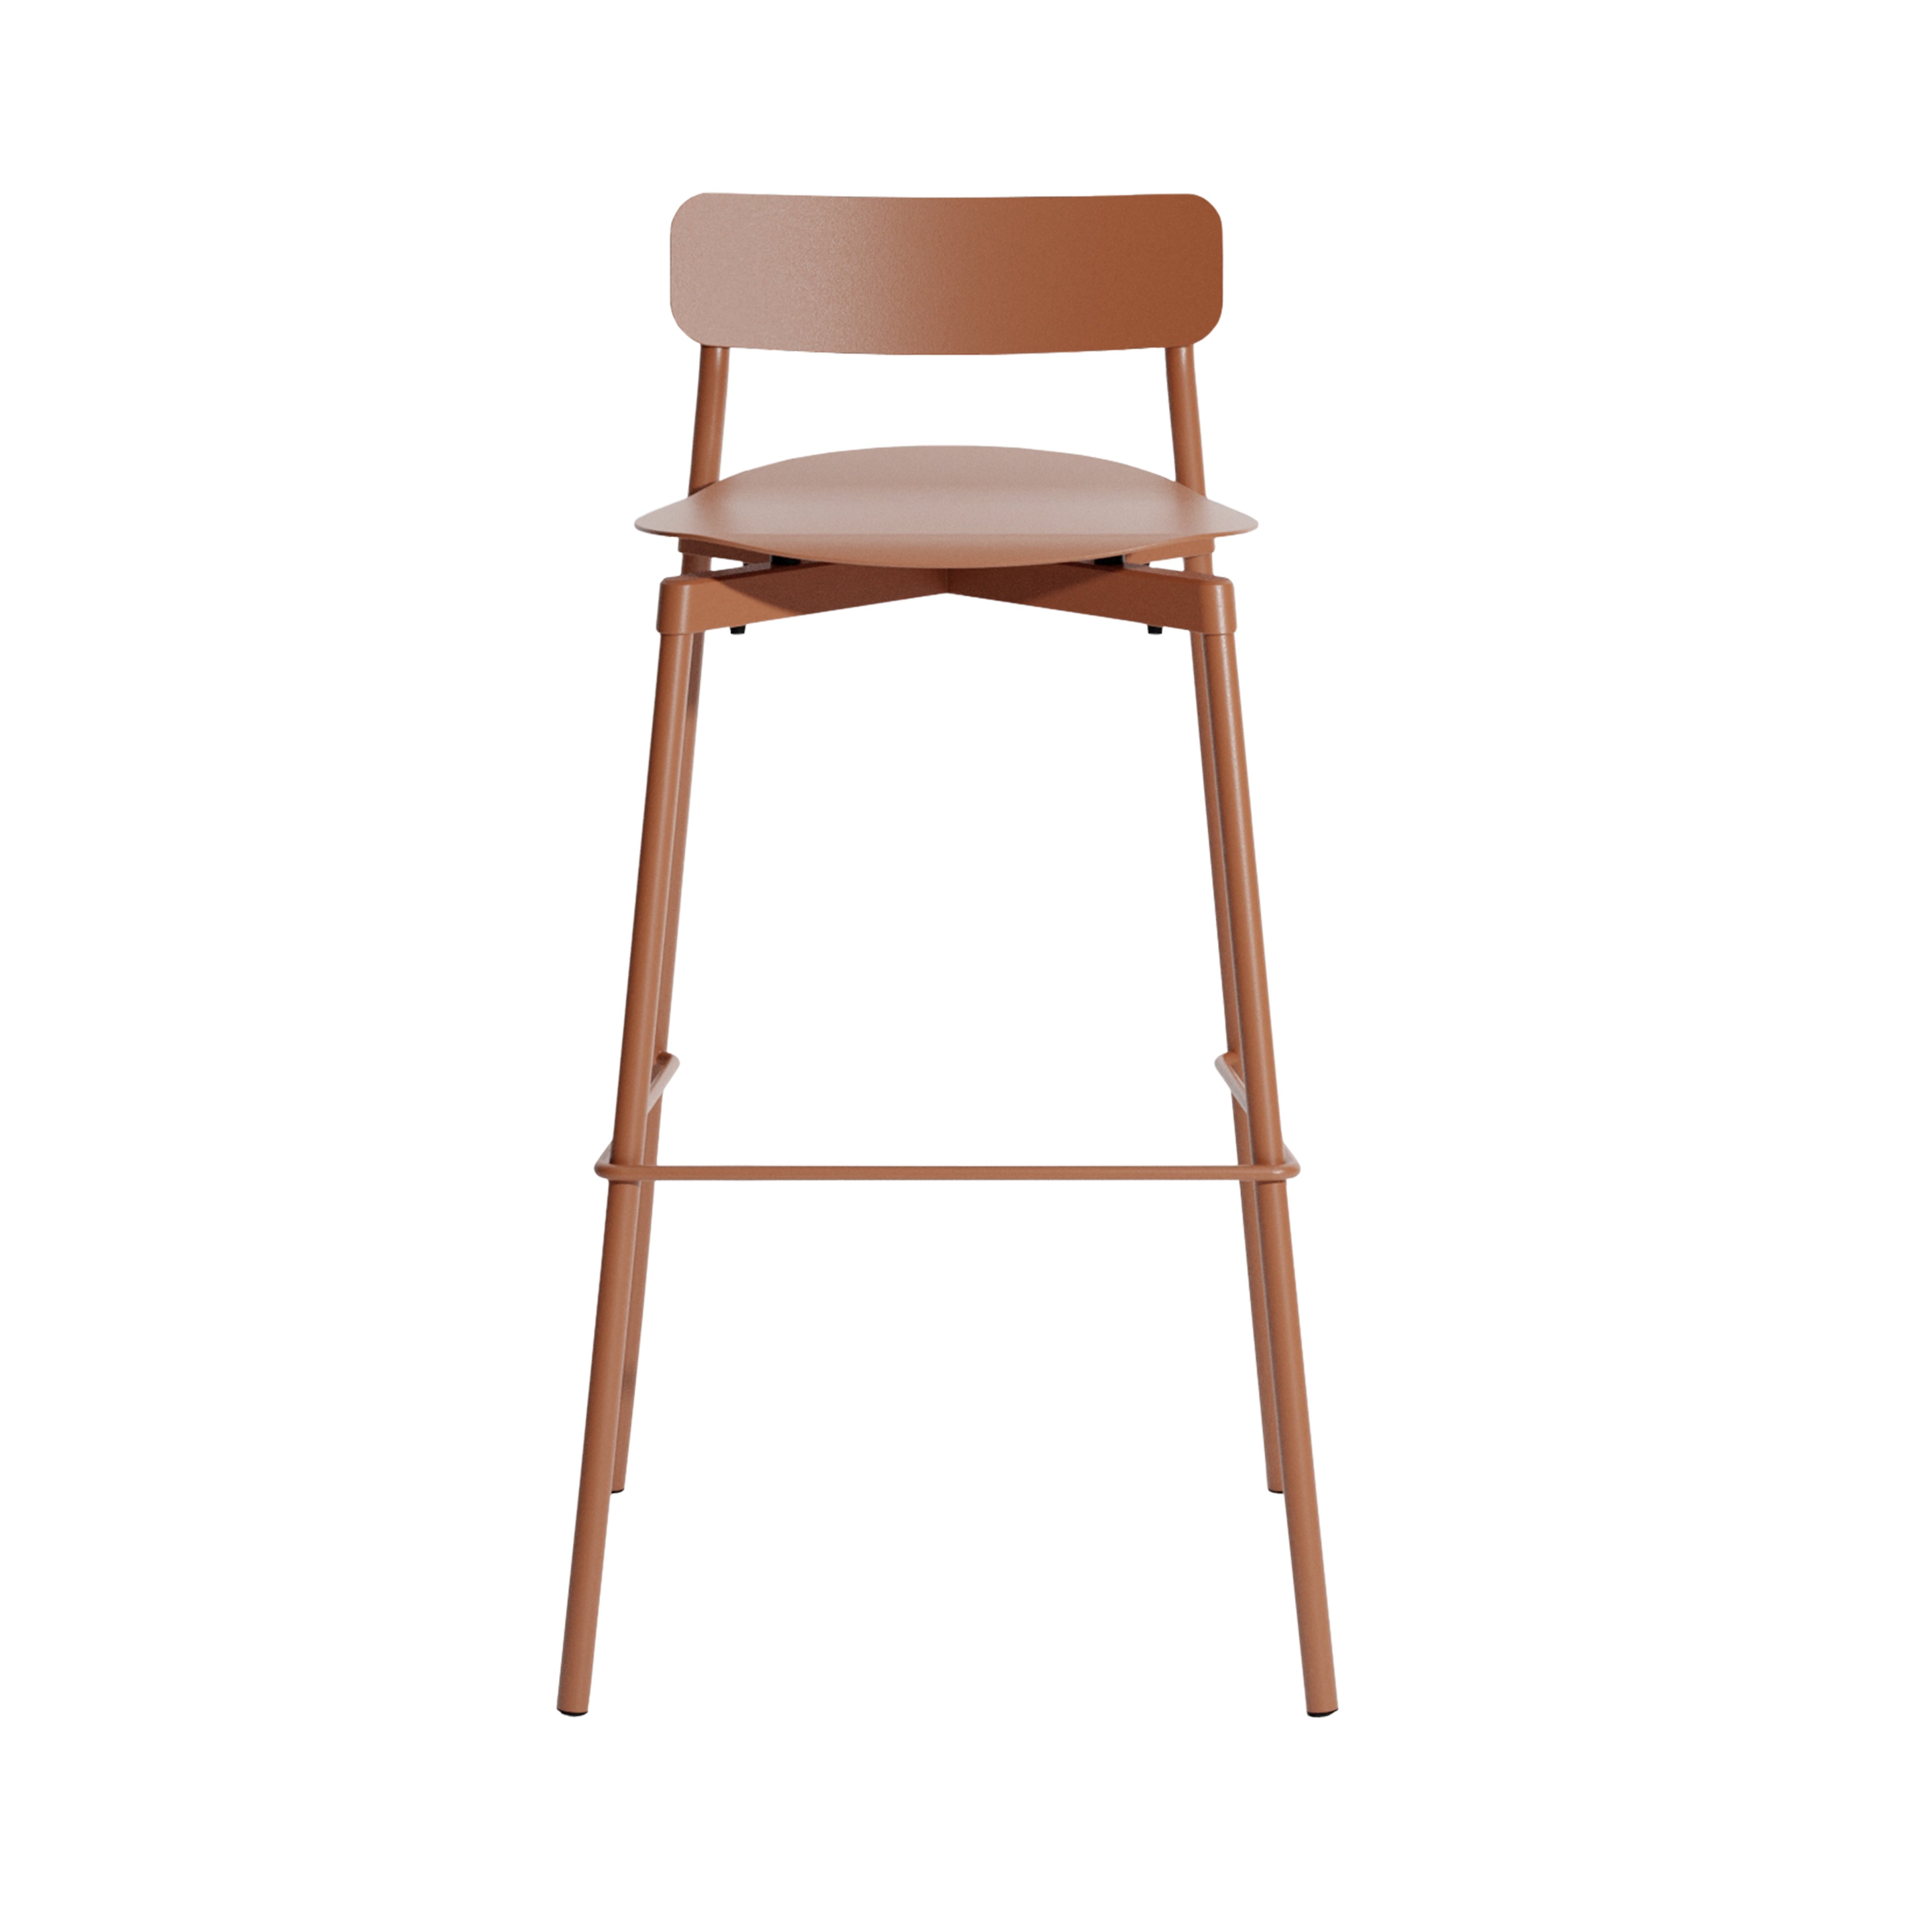  Fromme Stacking Bar + Counter Stool: Bar + Terracotta